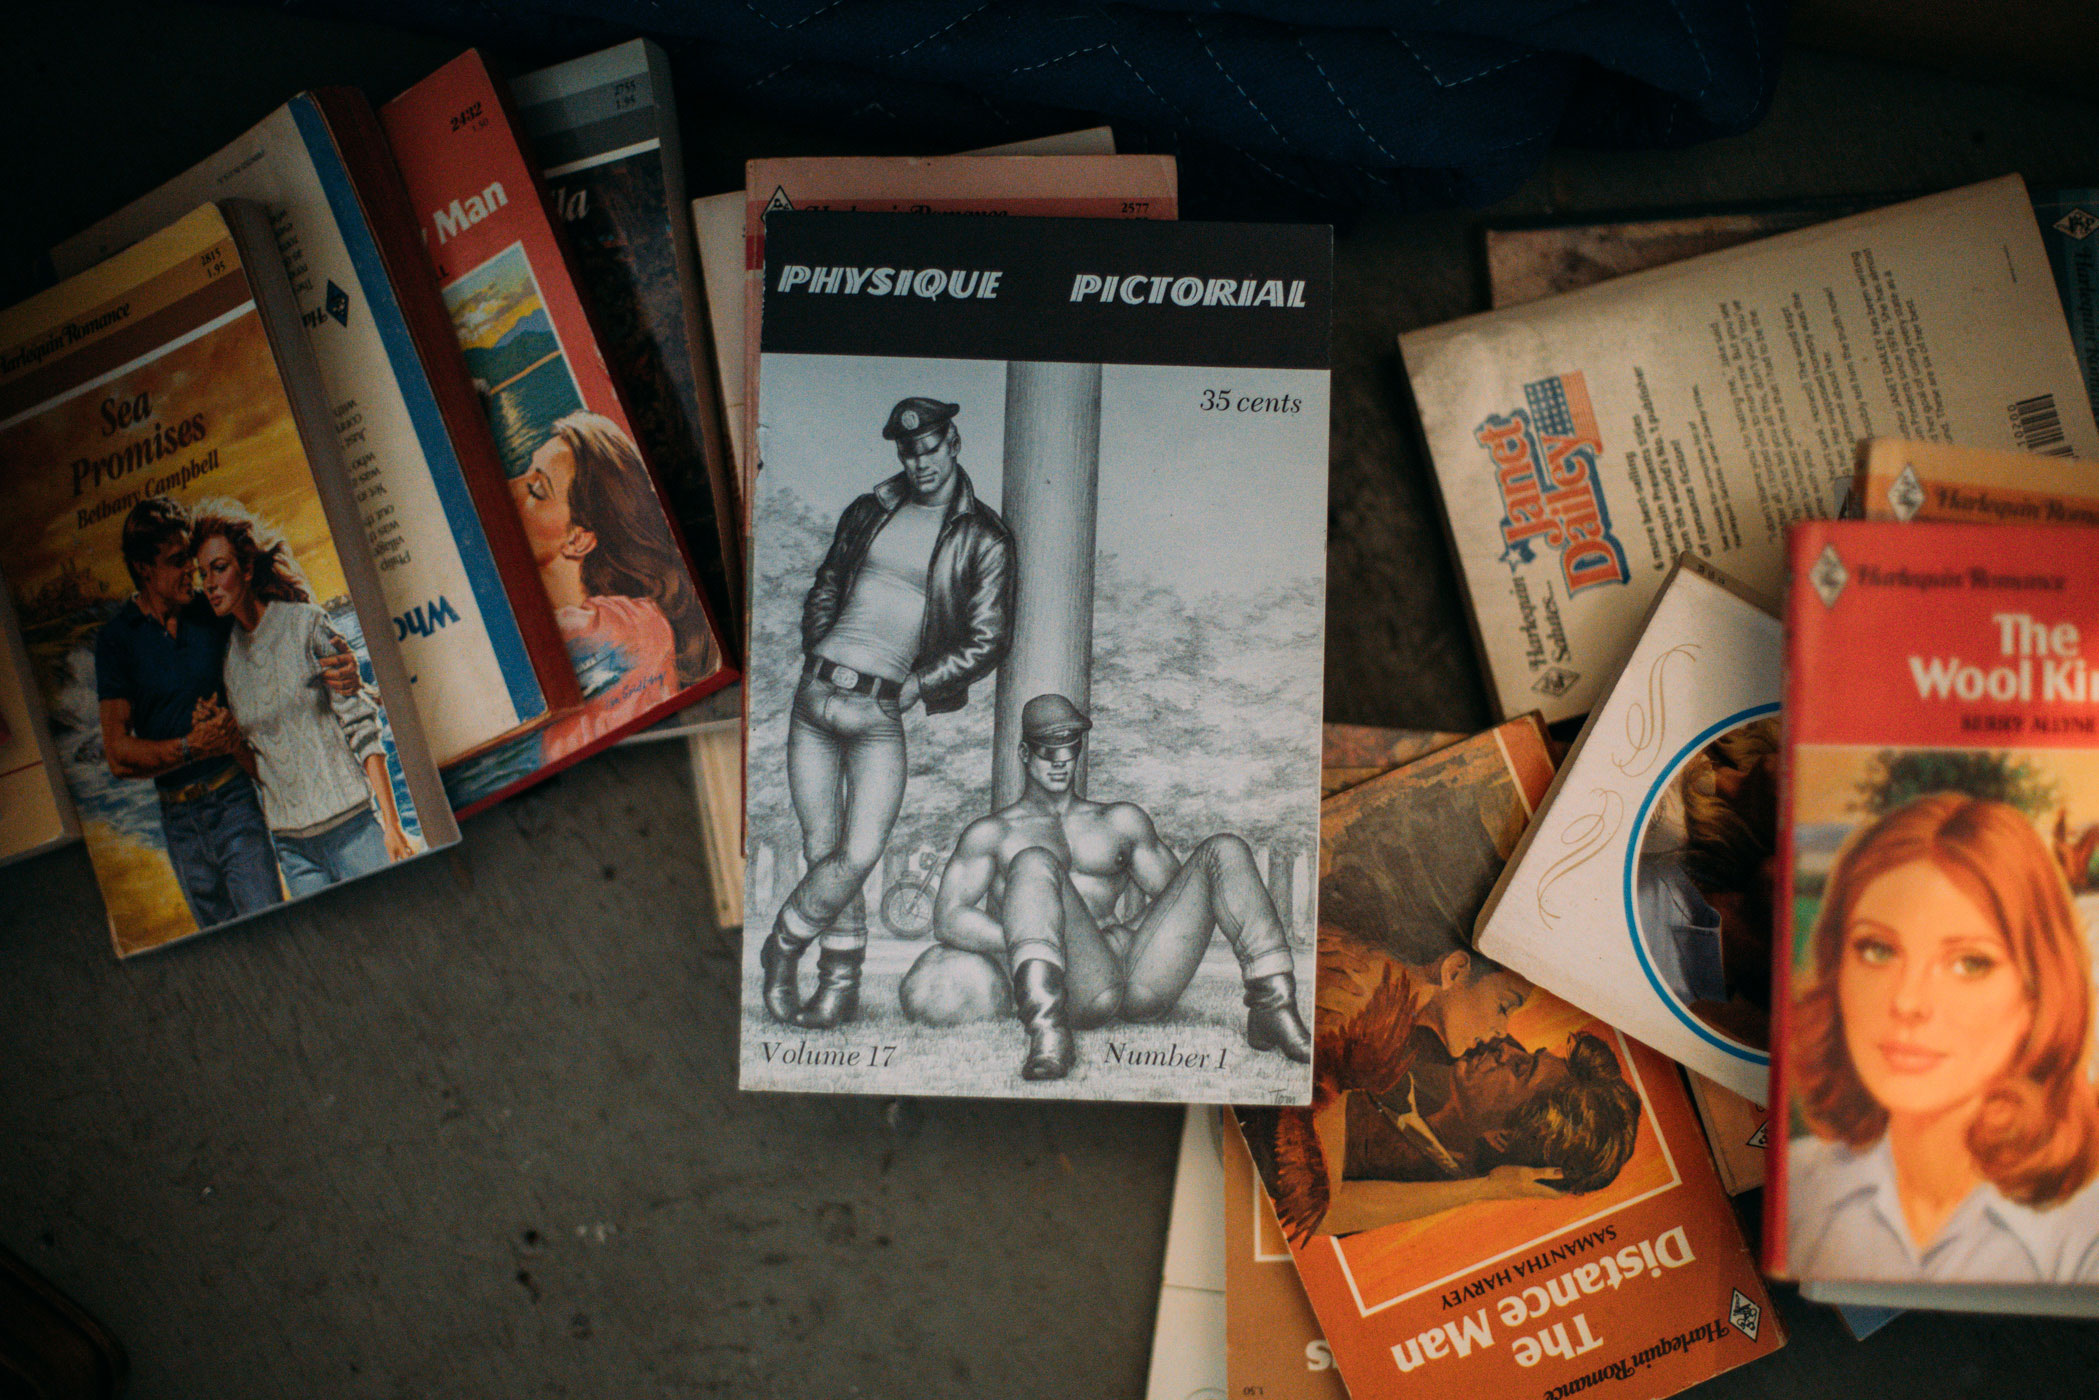 Queerskins installation on Canal Street. A close up of romance novels amongst vintage Tom of Finland.